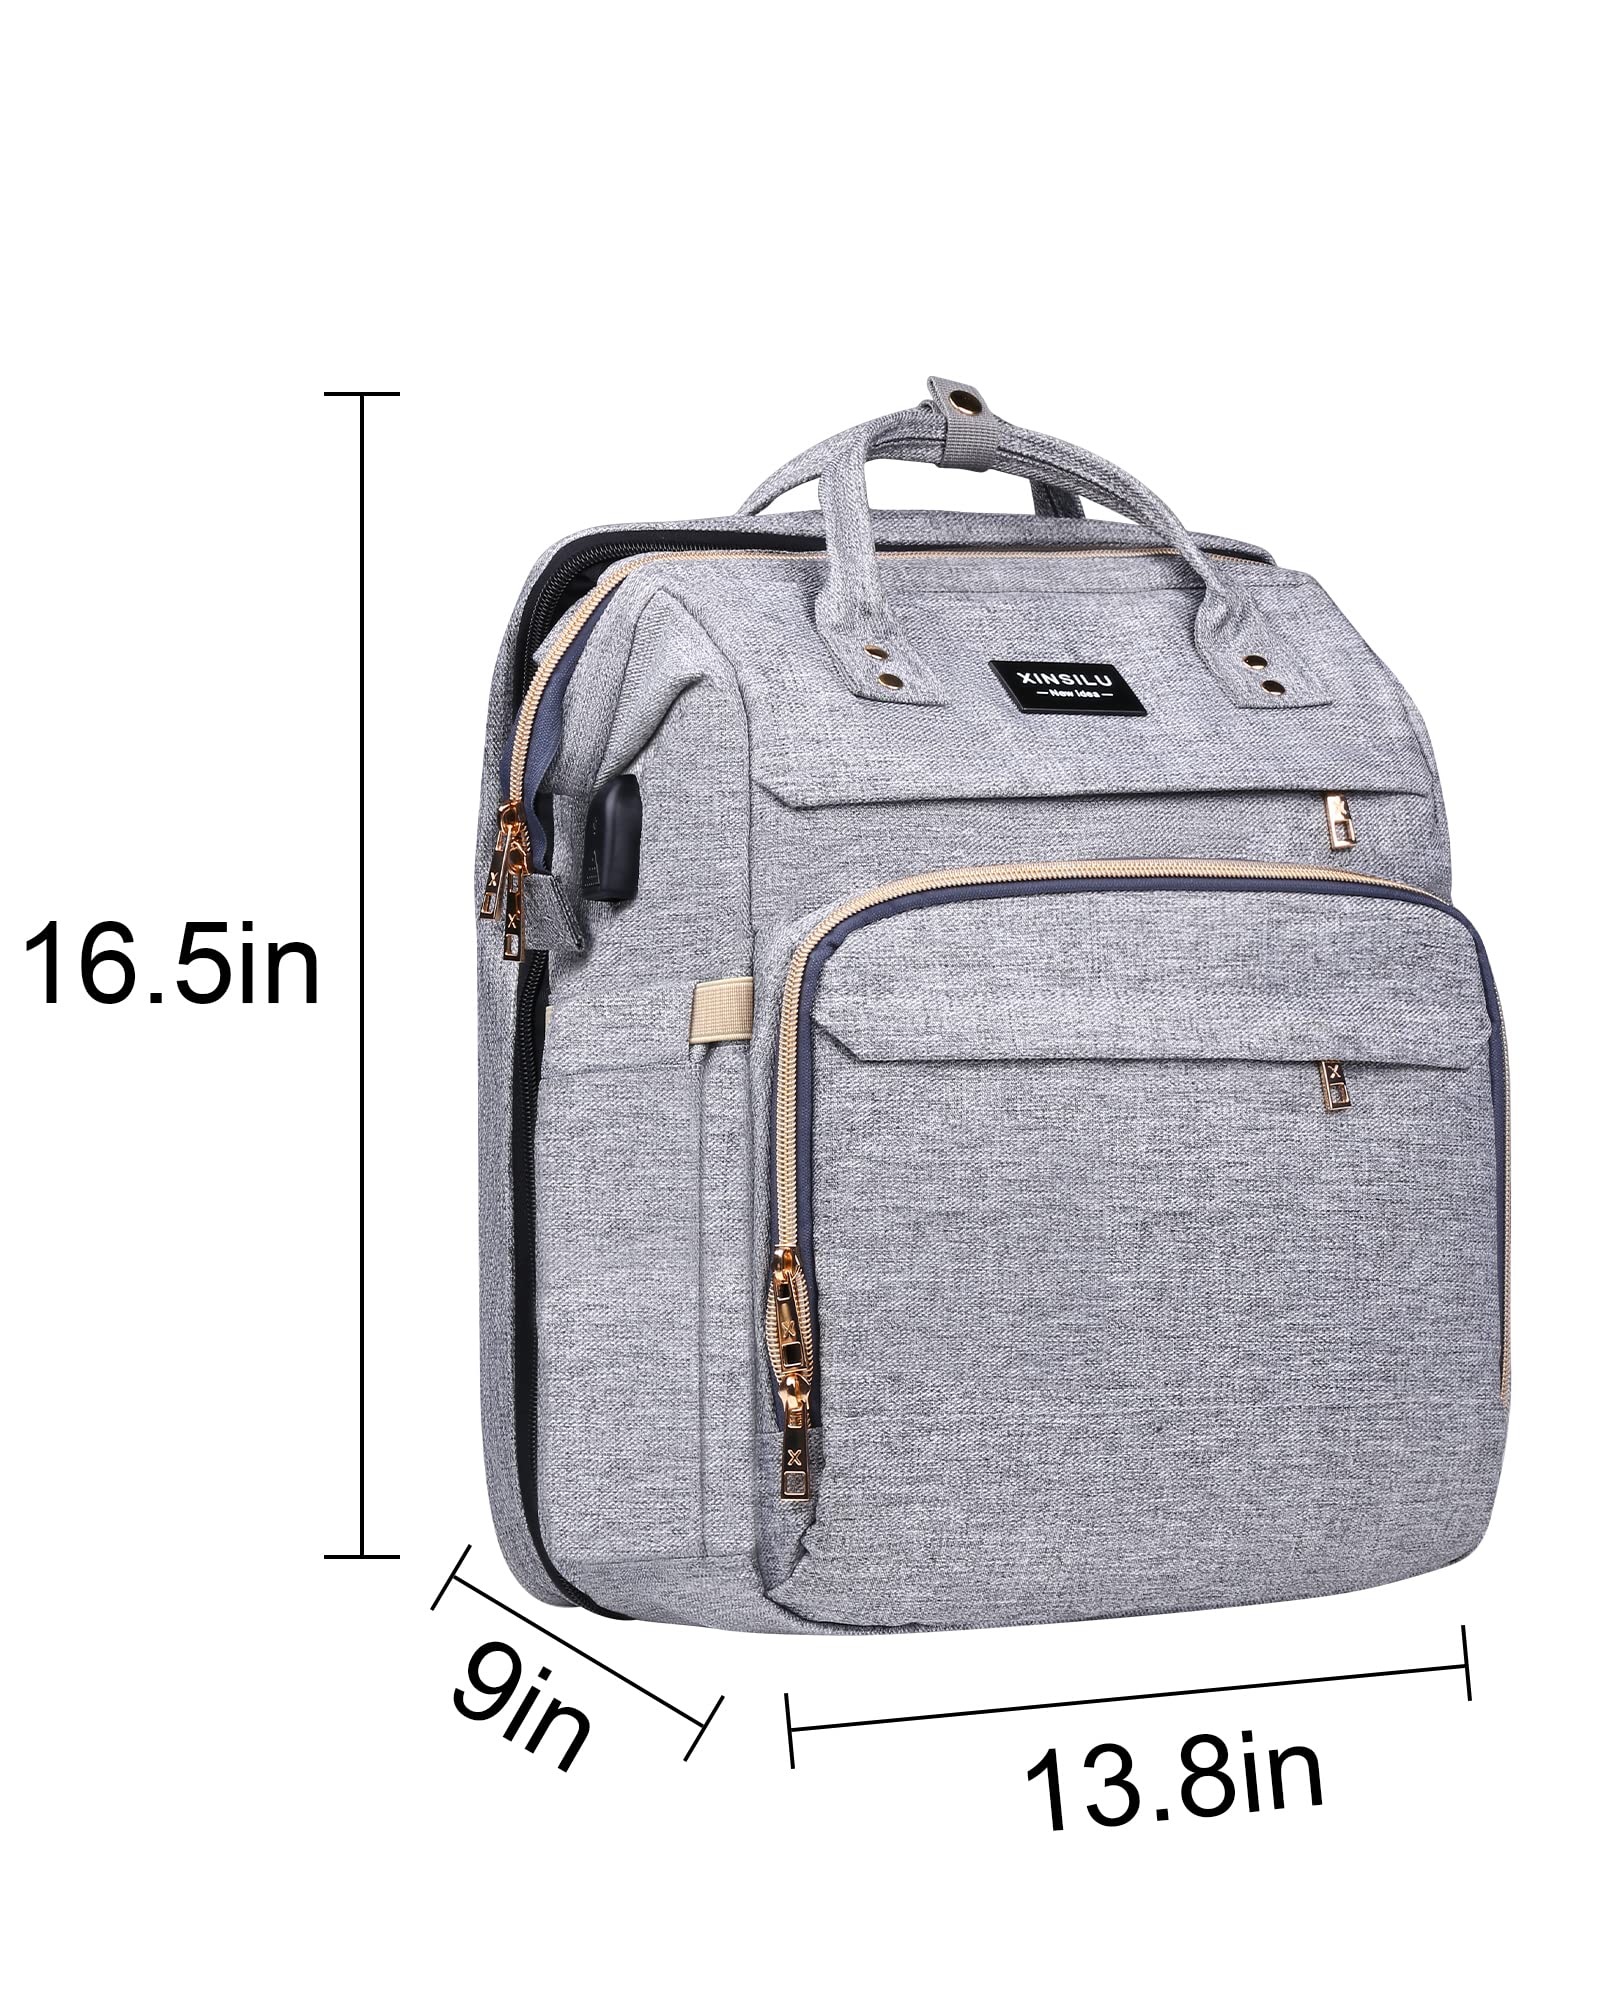 Xinsilu Diaper Bag Backpack Large Baby Diaper Bags for Boys & Girls with Changing Station,Changing Bags Baby Registry Search Waterproof Stylish Newborn Baby Essential Gifts Lightg Grey